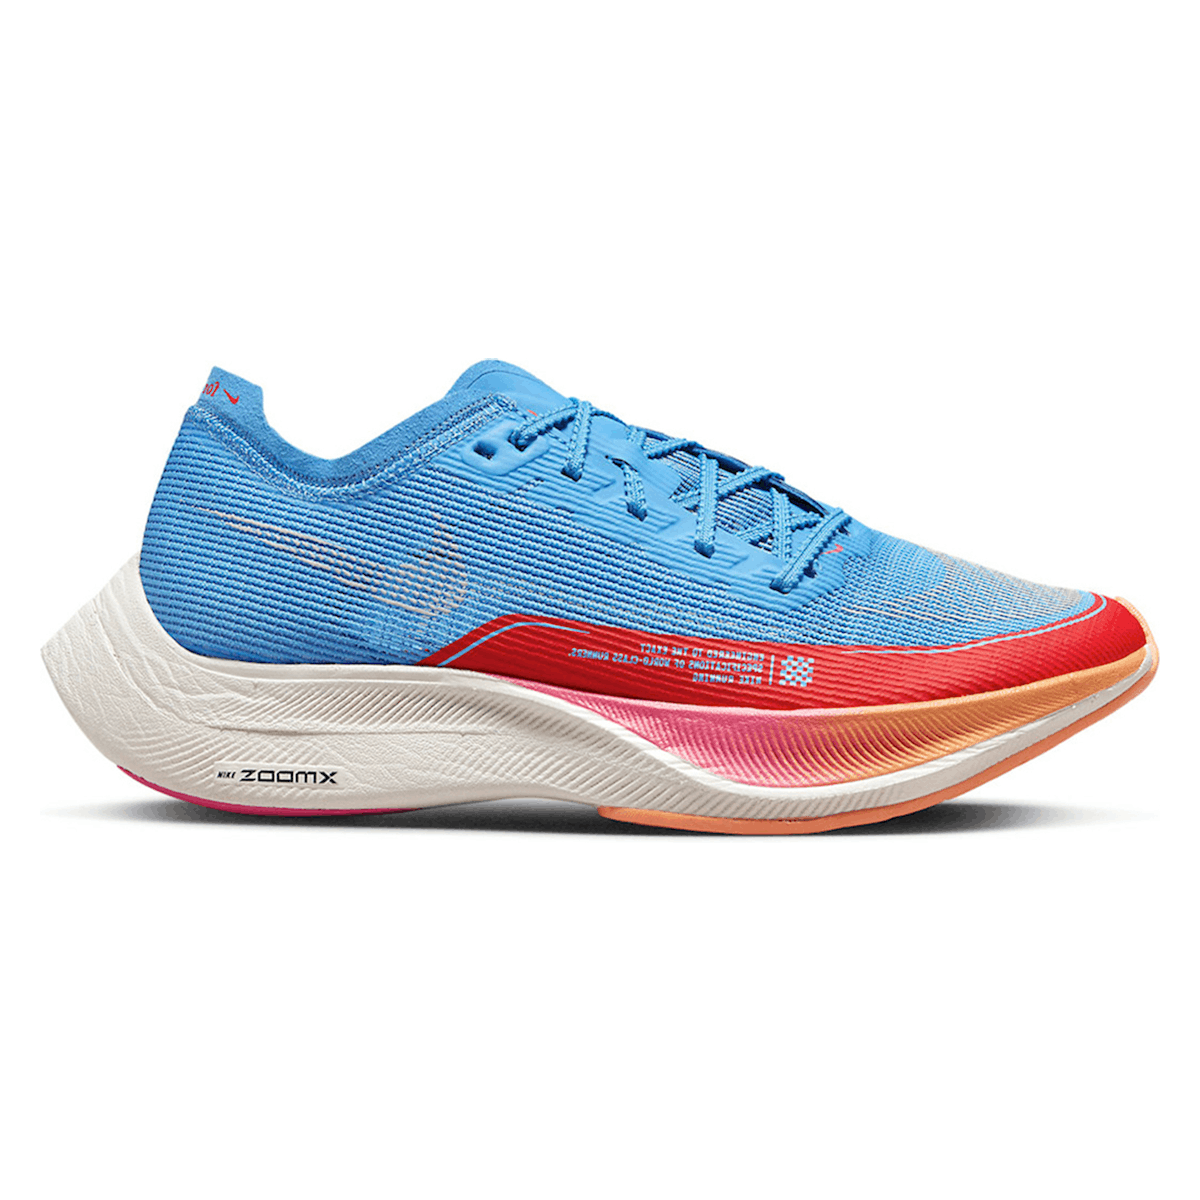 Nike ZoomX Vaporfly Next% 2 For Future Me